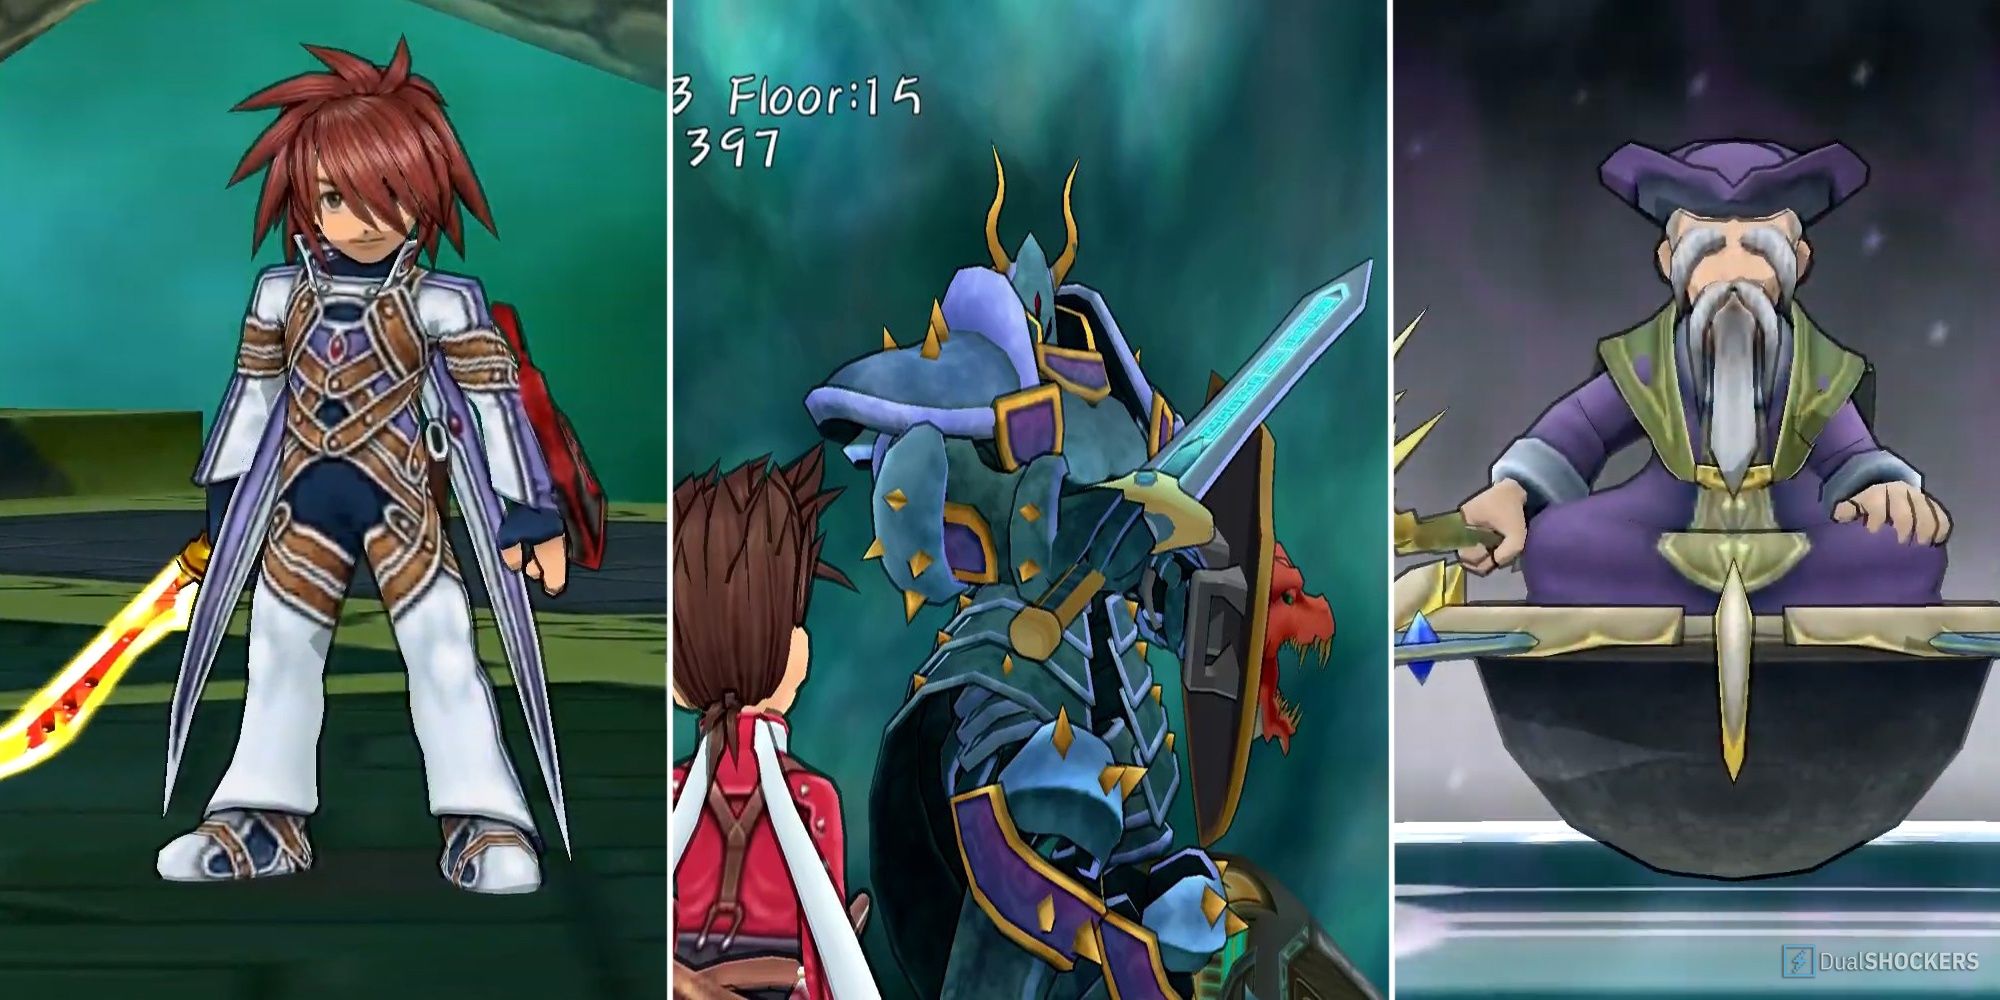 From Left To Right - Kratos, Livinig Armor, And Maxwell From Tales Of Symphonia